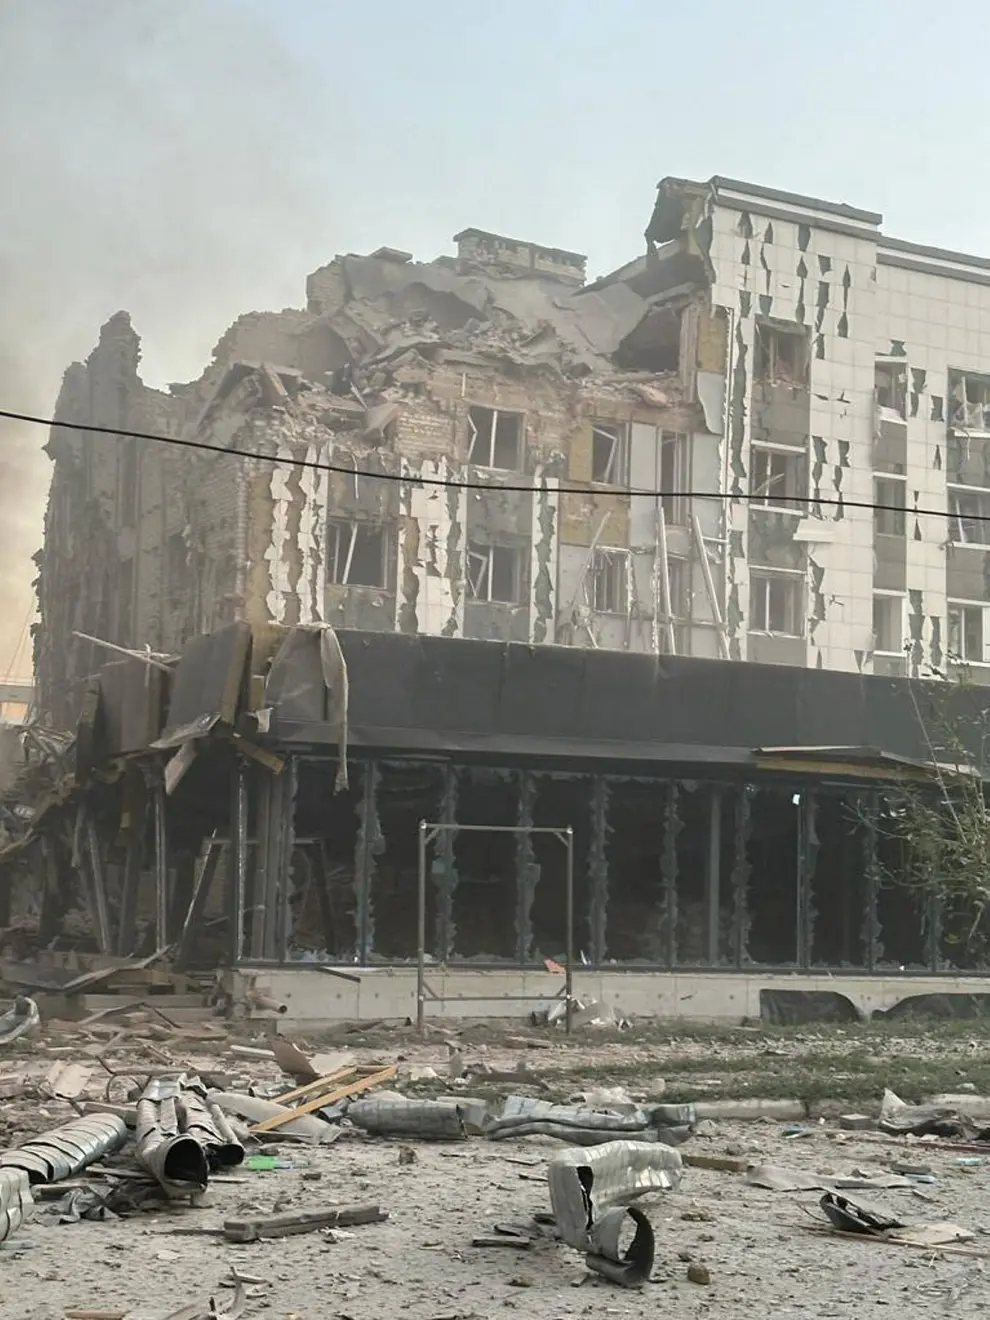 Pokrovsk (Ukraine), 07/08/2023.- A man carries an injured Ukrainian woman after an explosion of a second rocket in the city of Pokrovsk, Donetsk area, Ukraine, 07 August 2023, amid the Russian invasion. At least five people died and 31 were injured after two rockets hit a residential building and a hotel downtown, according to a National Police report. Russian troops entered Ukrainian territory in February 2022, starting a conflict that has provoked destruction and a humanitarian crisis. (Rusia, Ucrania) EFE/EPA/STANISLAV KRUPAR
 UKRAINE RUSSIA CONFLICT